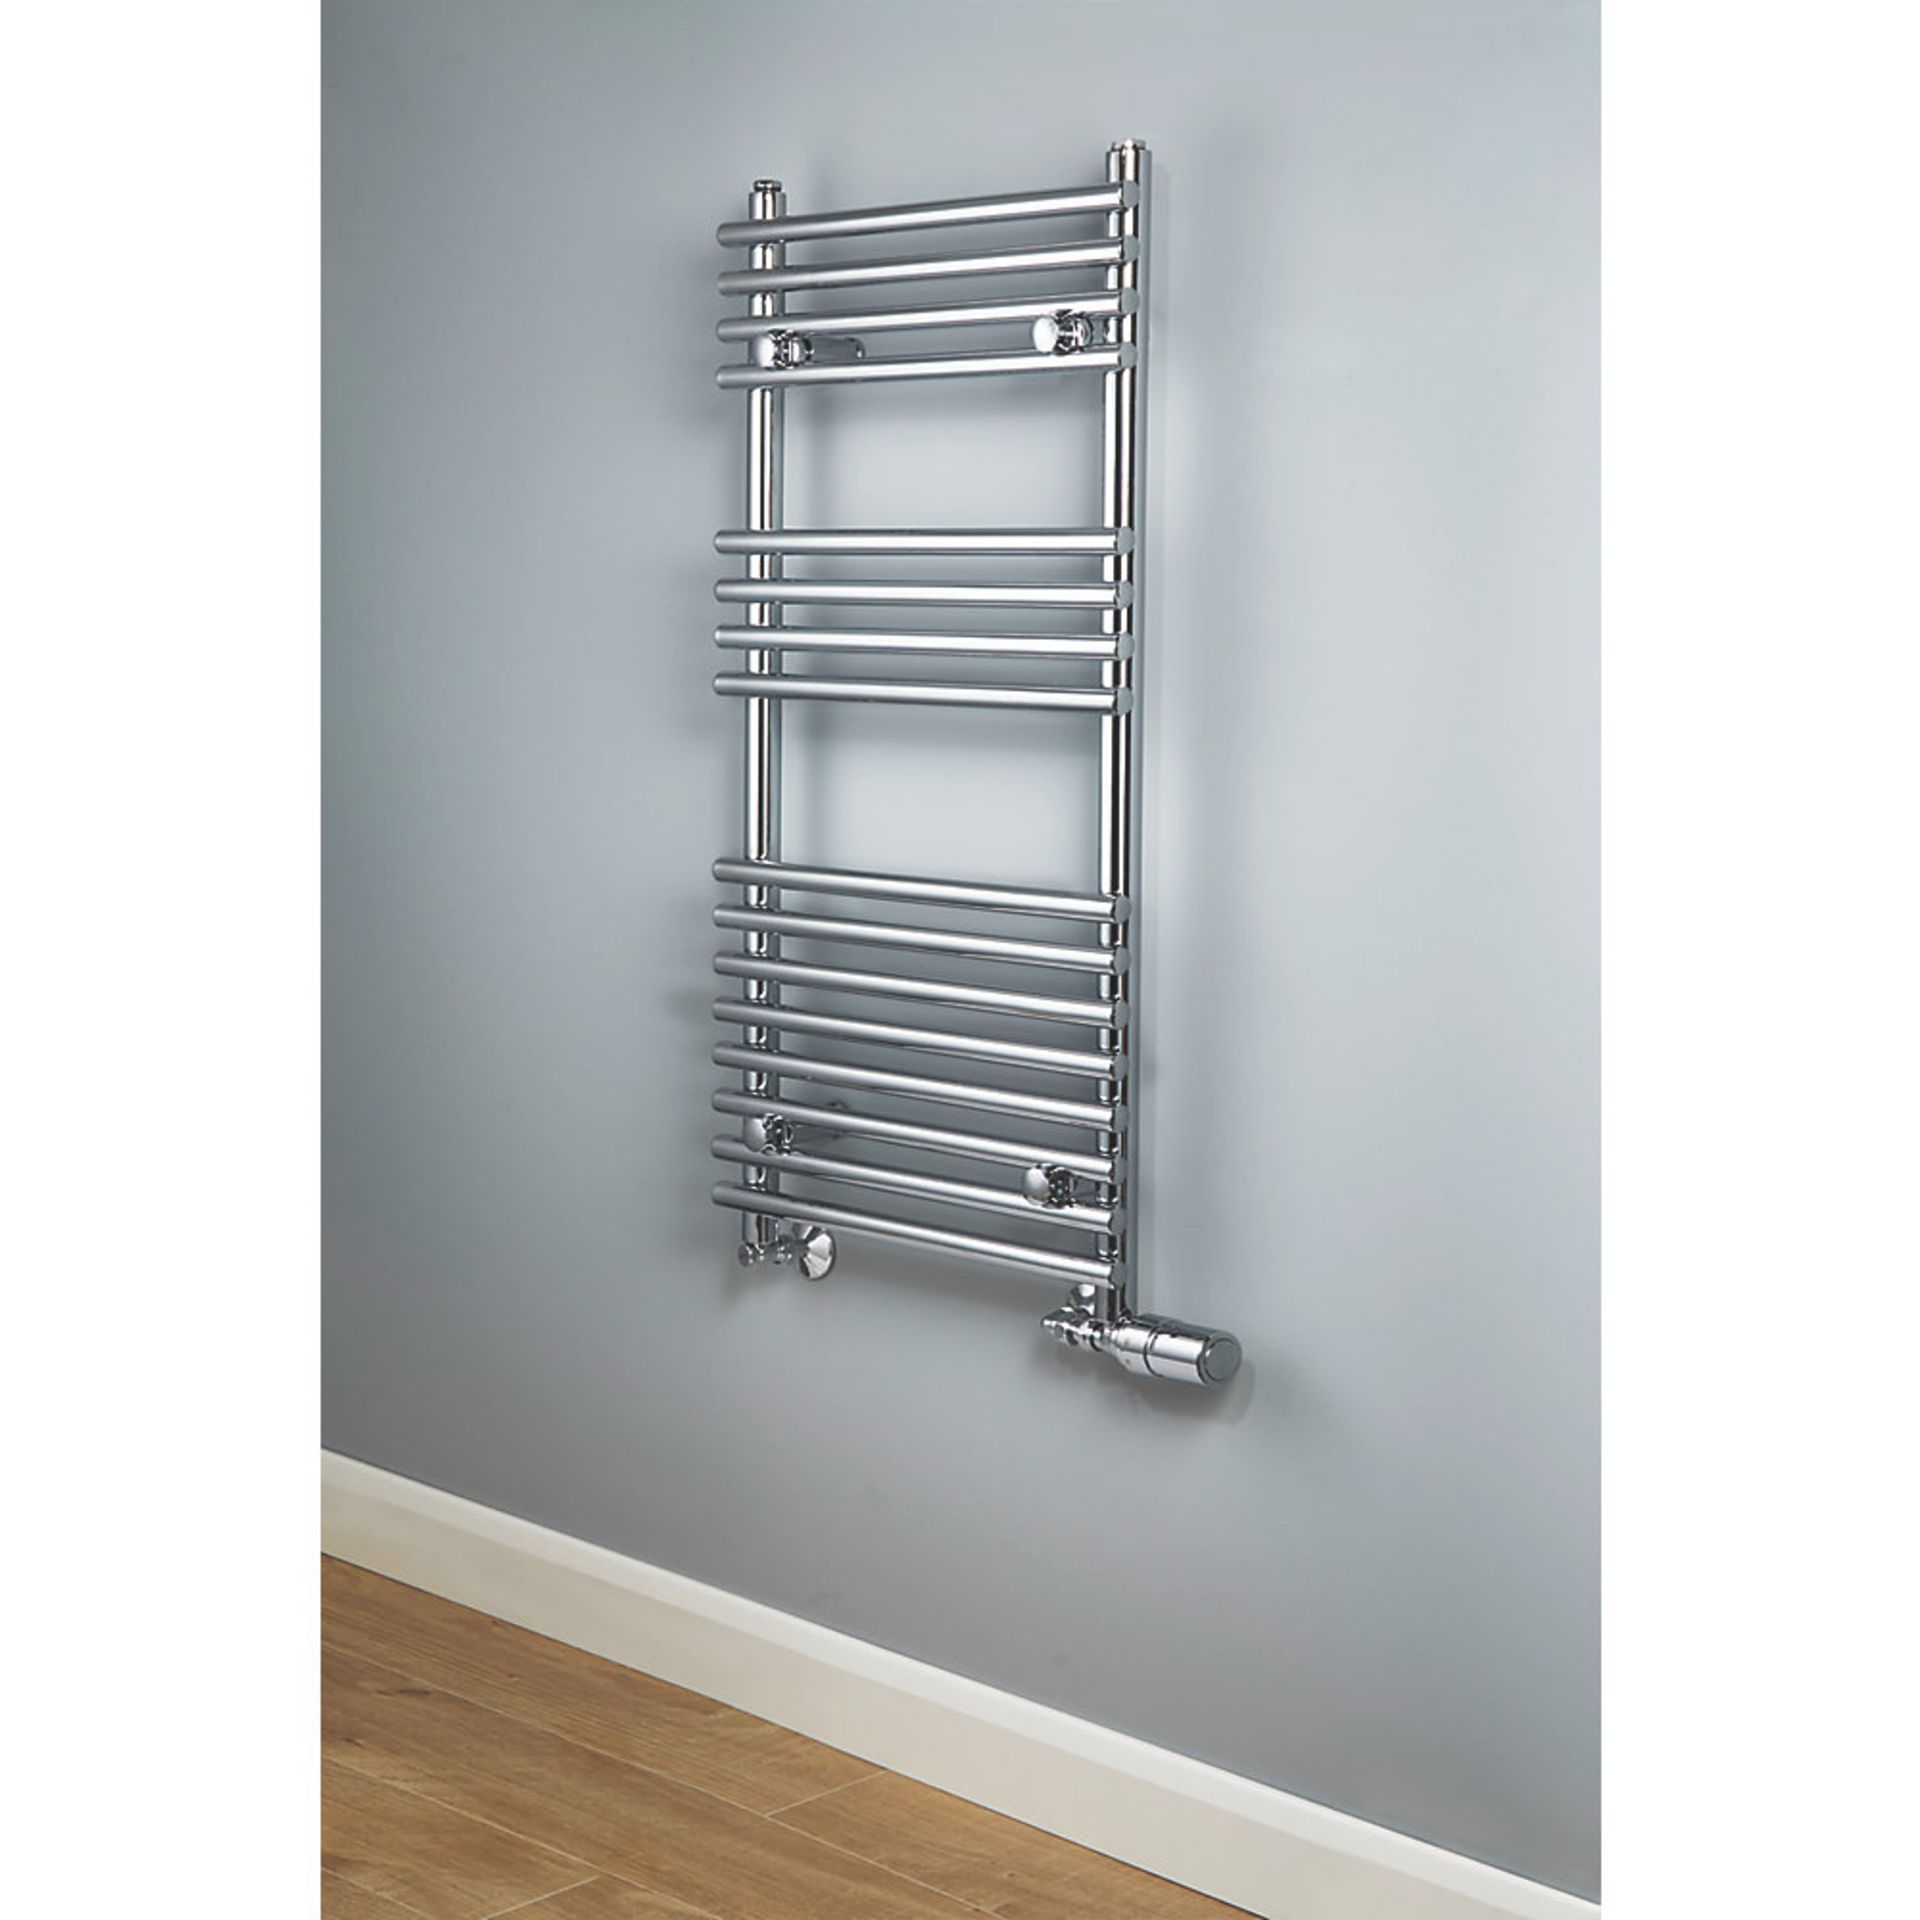 (EY158) 900 x 450mm Chrome Towel Warmer. Mild steel construction with a chrome-plated finish. Flat